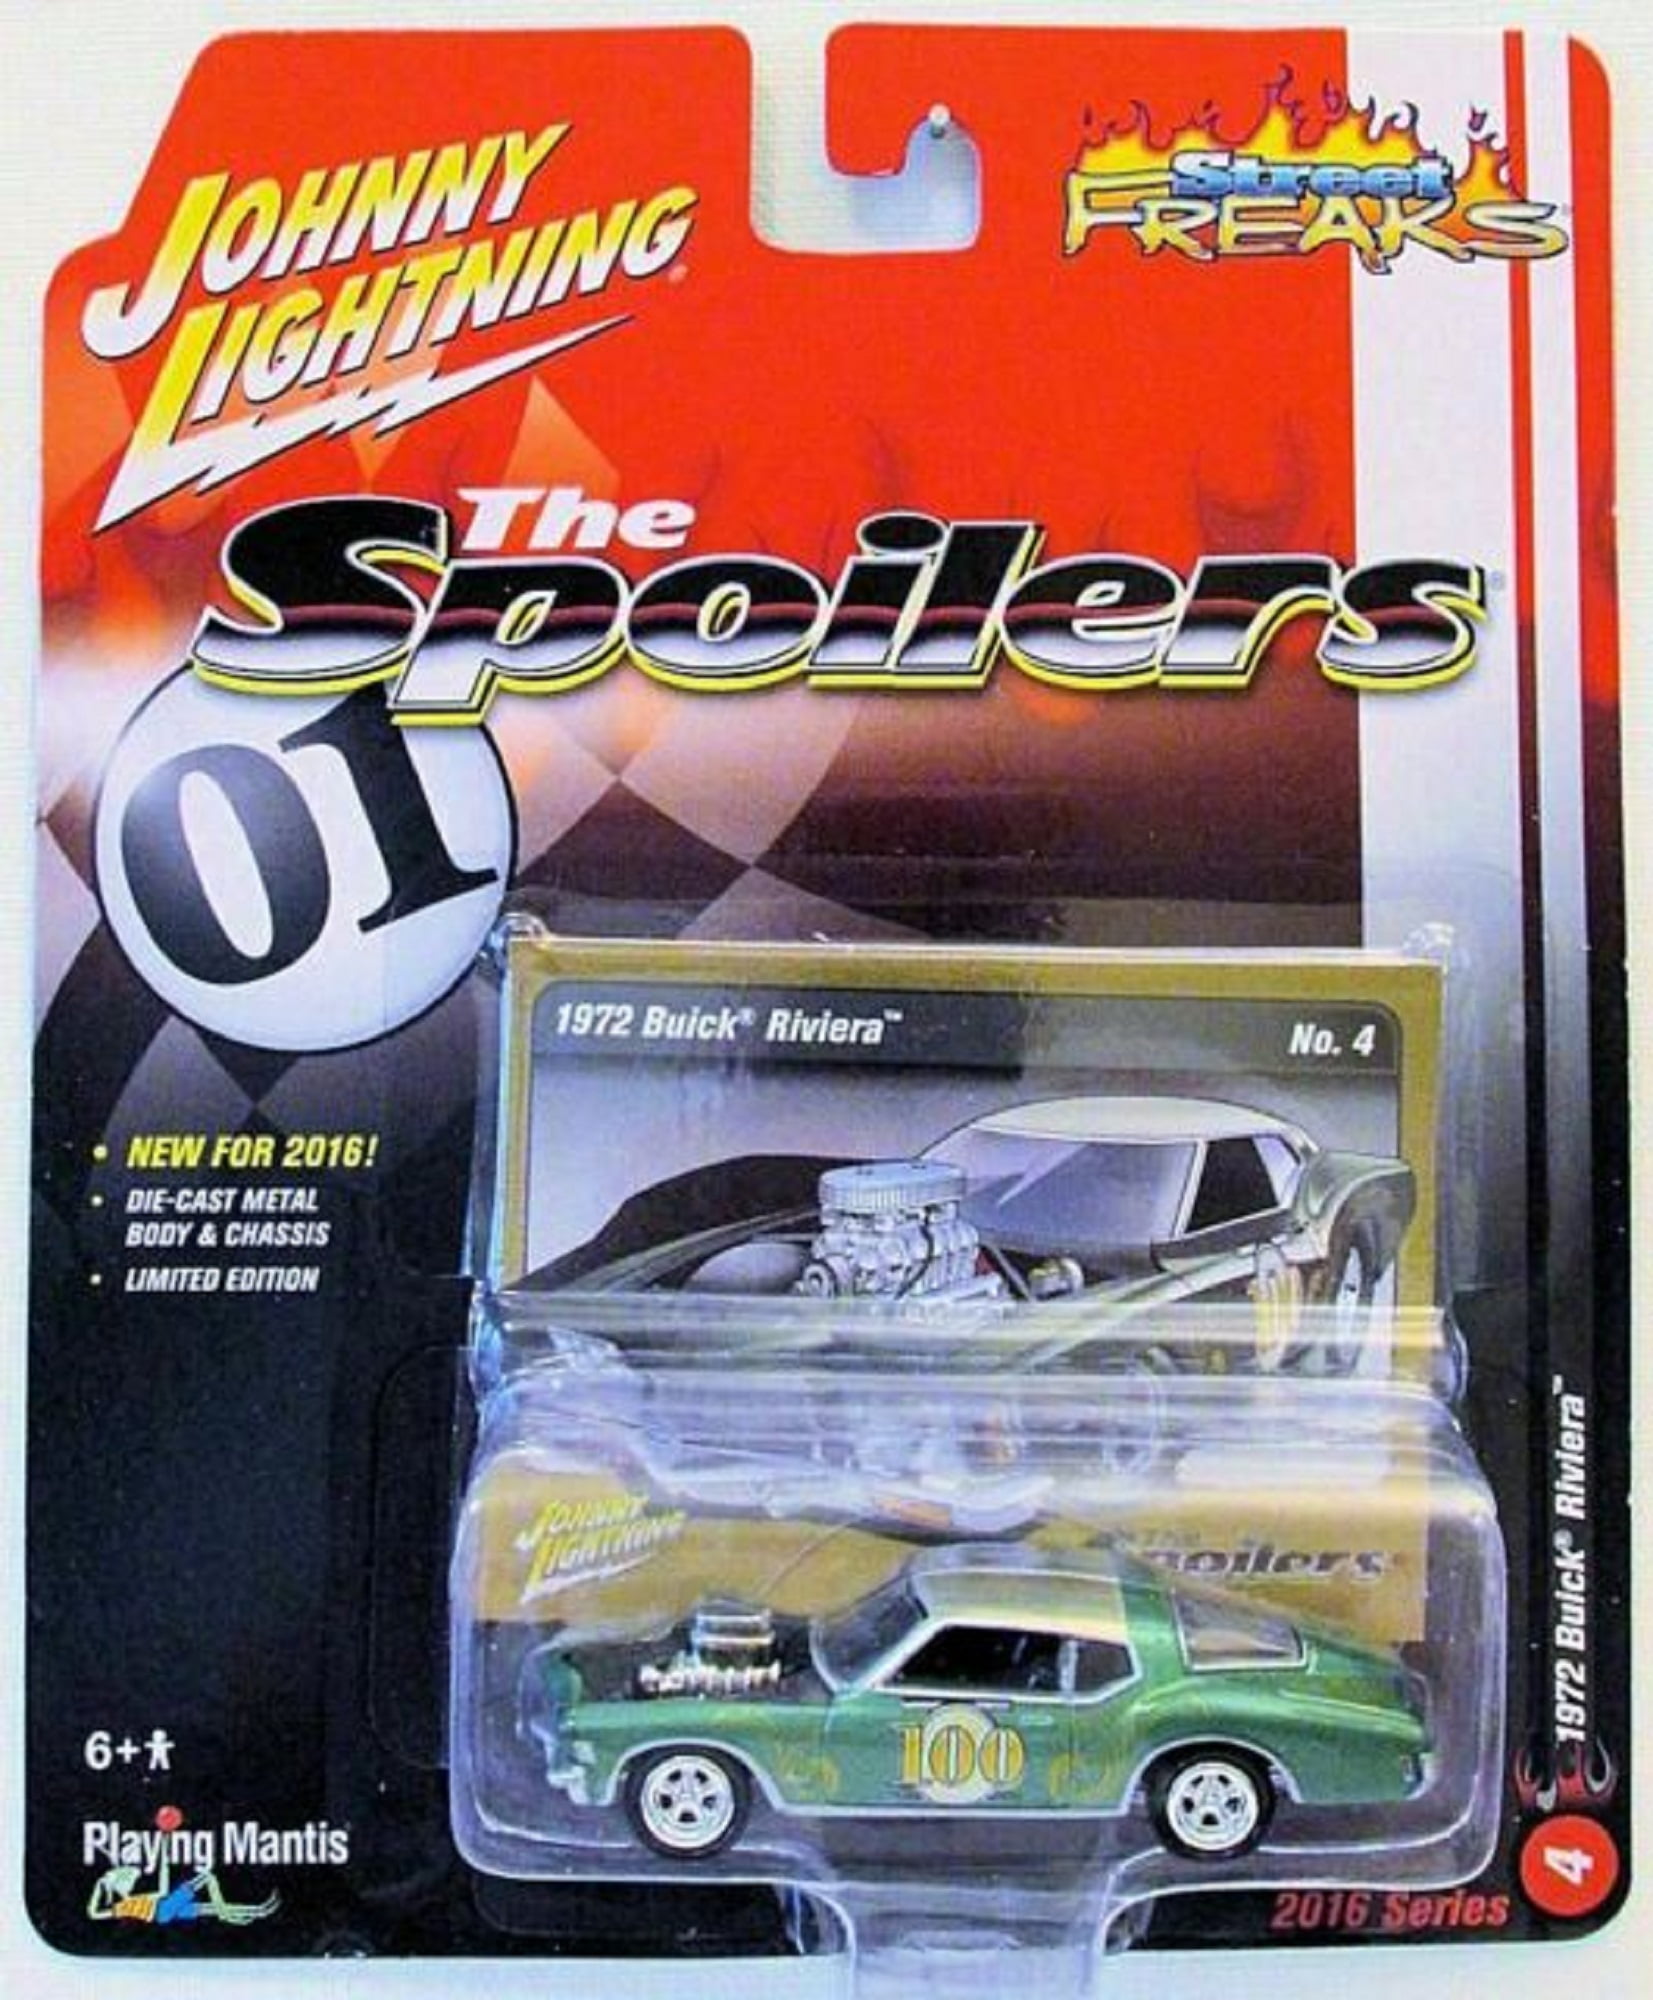 NG33 Johnny Lightning Street Freaks  The Spoilers 1972 Buick Riviera 